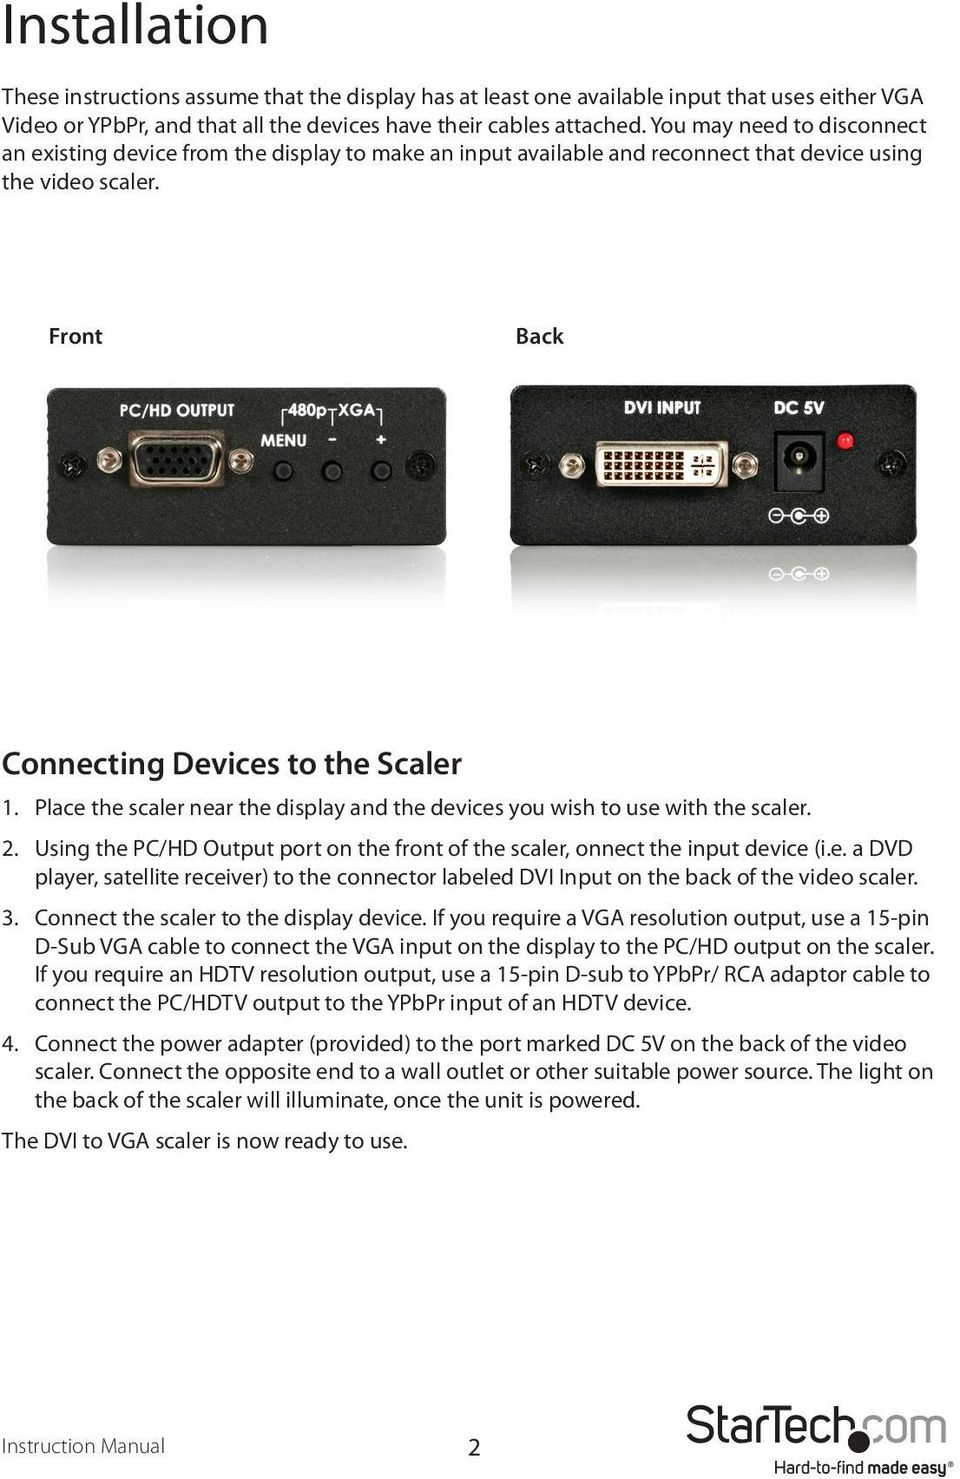 Place the scaler near the display and the devices you wish to use with the scaler. 2. Using the PC/HD Output port on the front of the scaler, onnect the input device (i.e. a DVD player, satellite receiver) to the connector labeled DVI Input on the back of the video scaler.